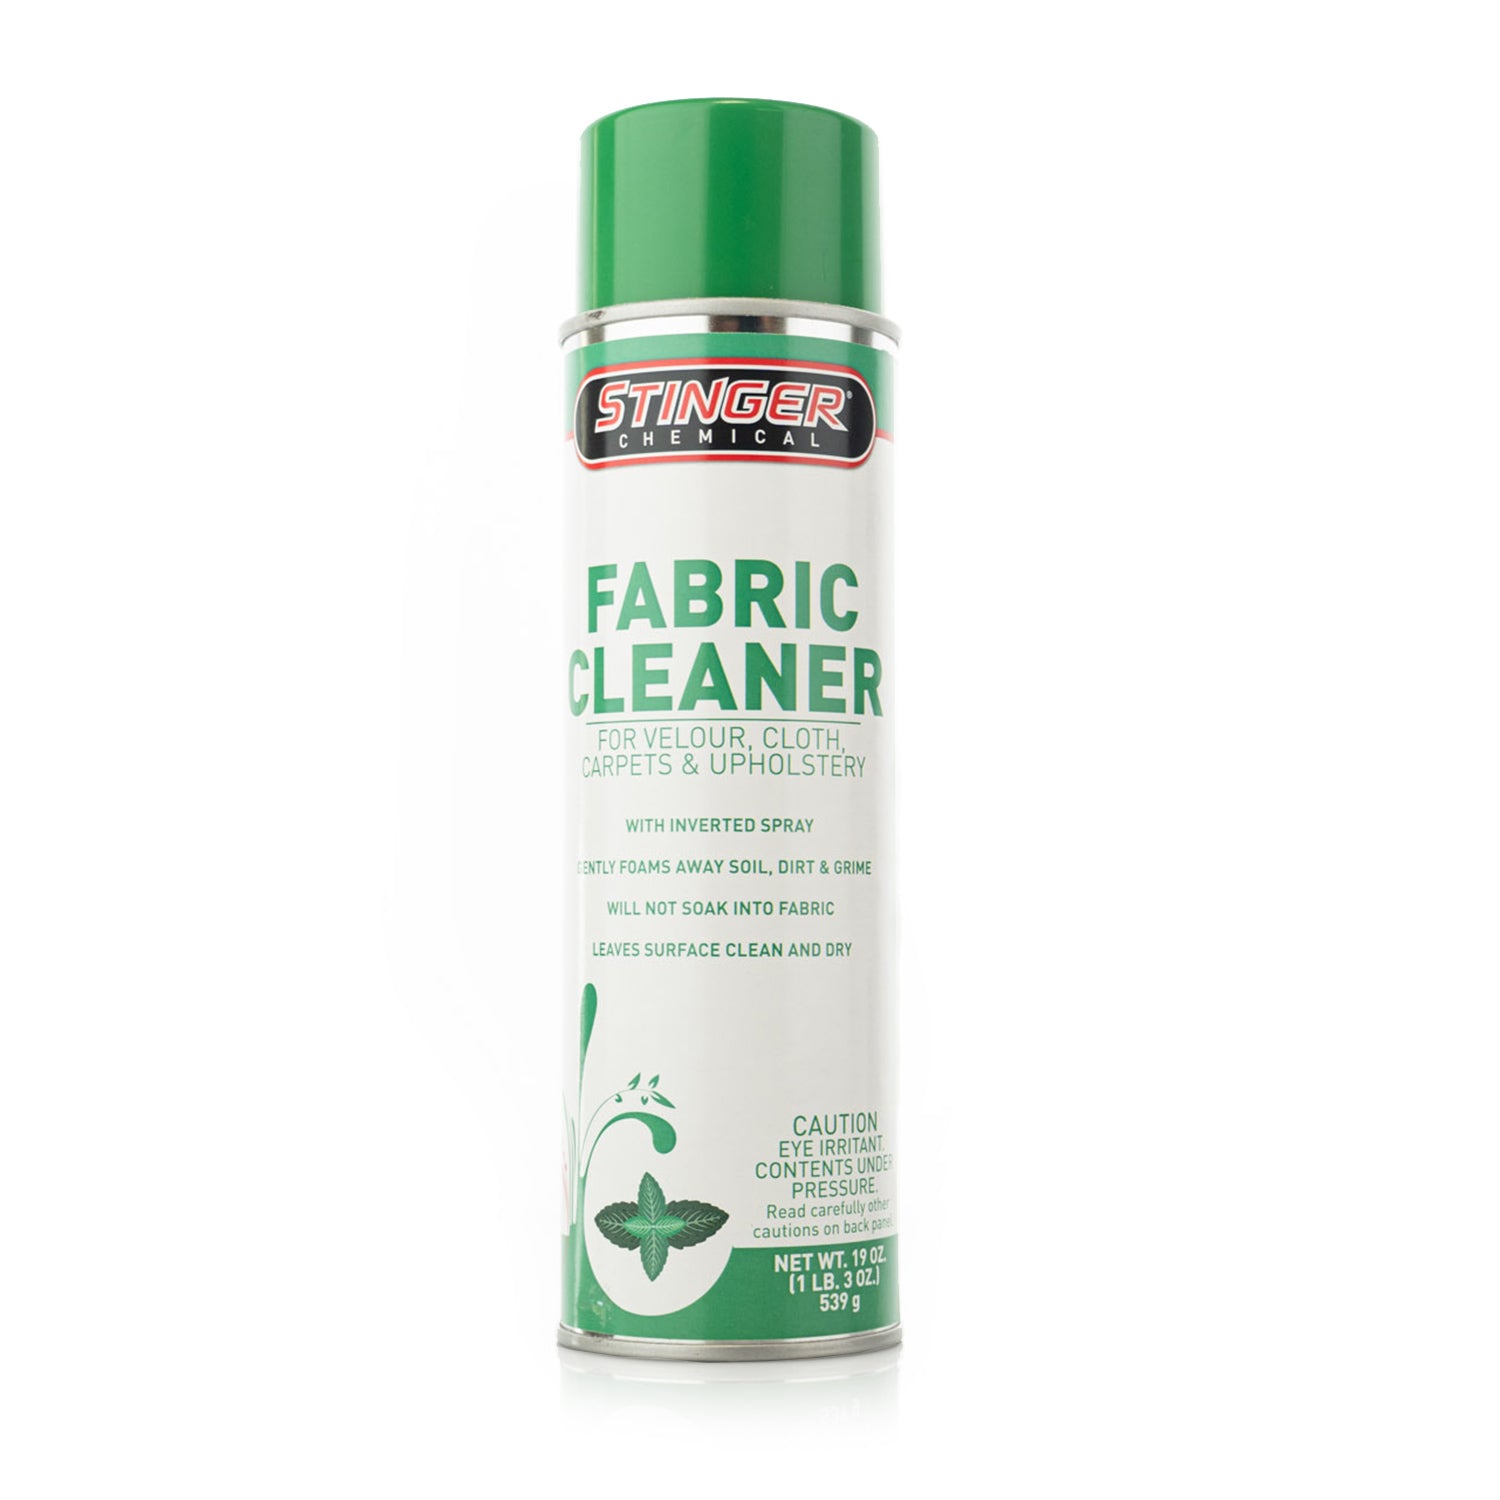 stinger-chemicals-fabric-cleaner-foaming-spray-aerosol-can